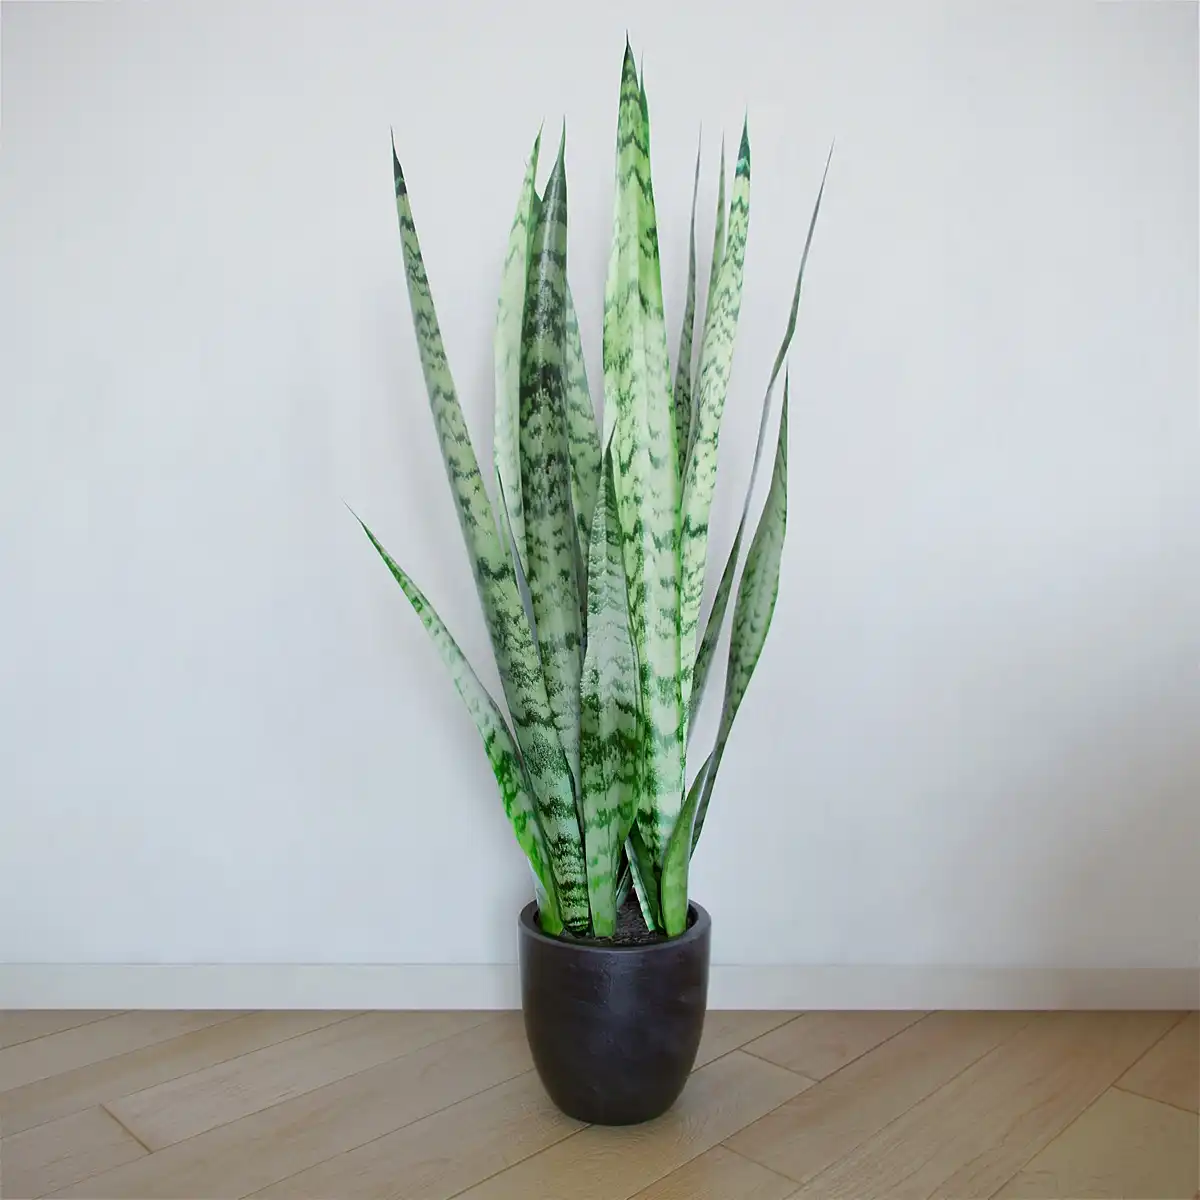 Houseplant sansevieria trifasciata 3D model or Mother-in-Law's Tongue or snake plant on the floor photorealistic visualization in the interior.